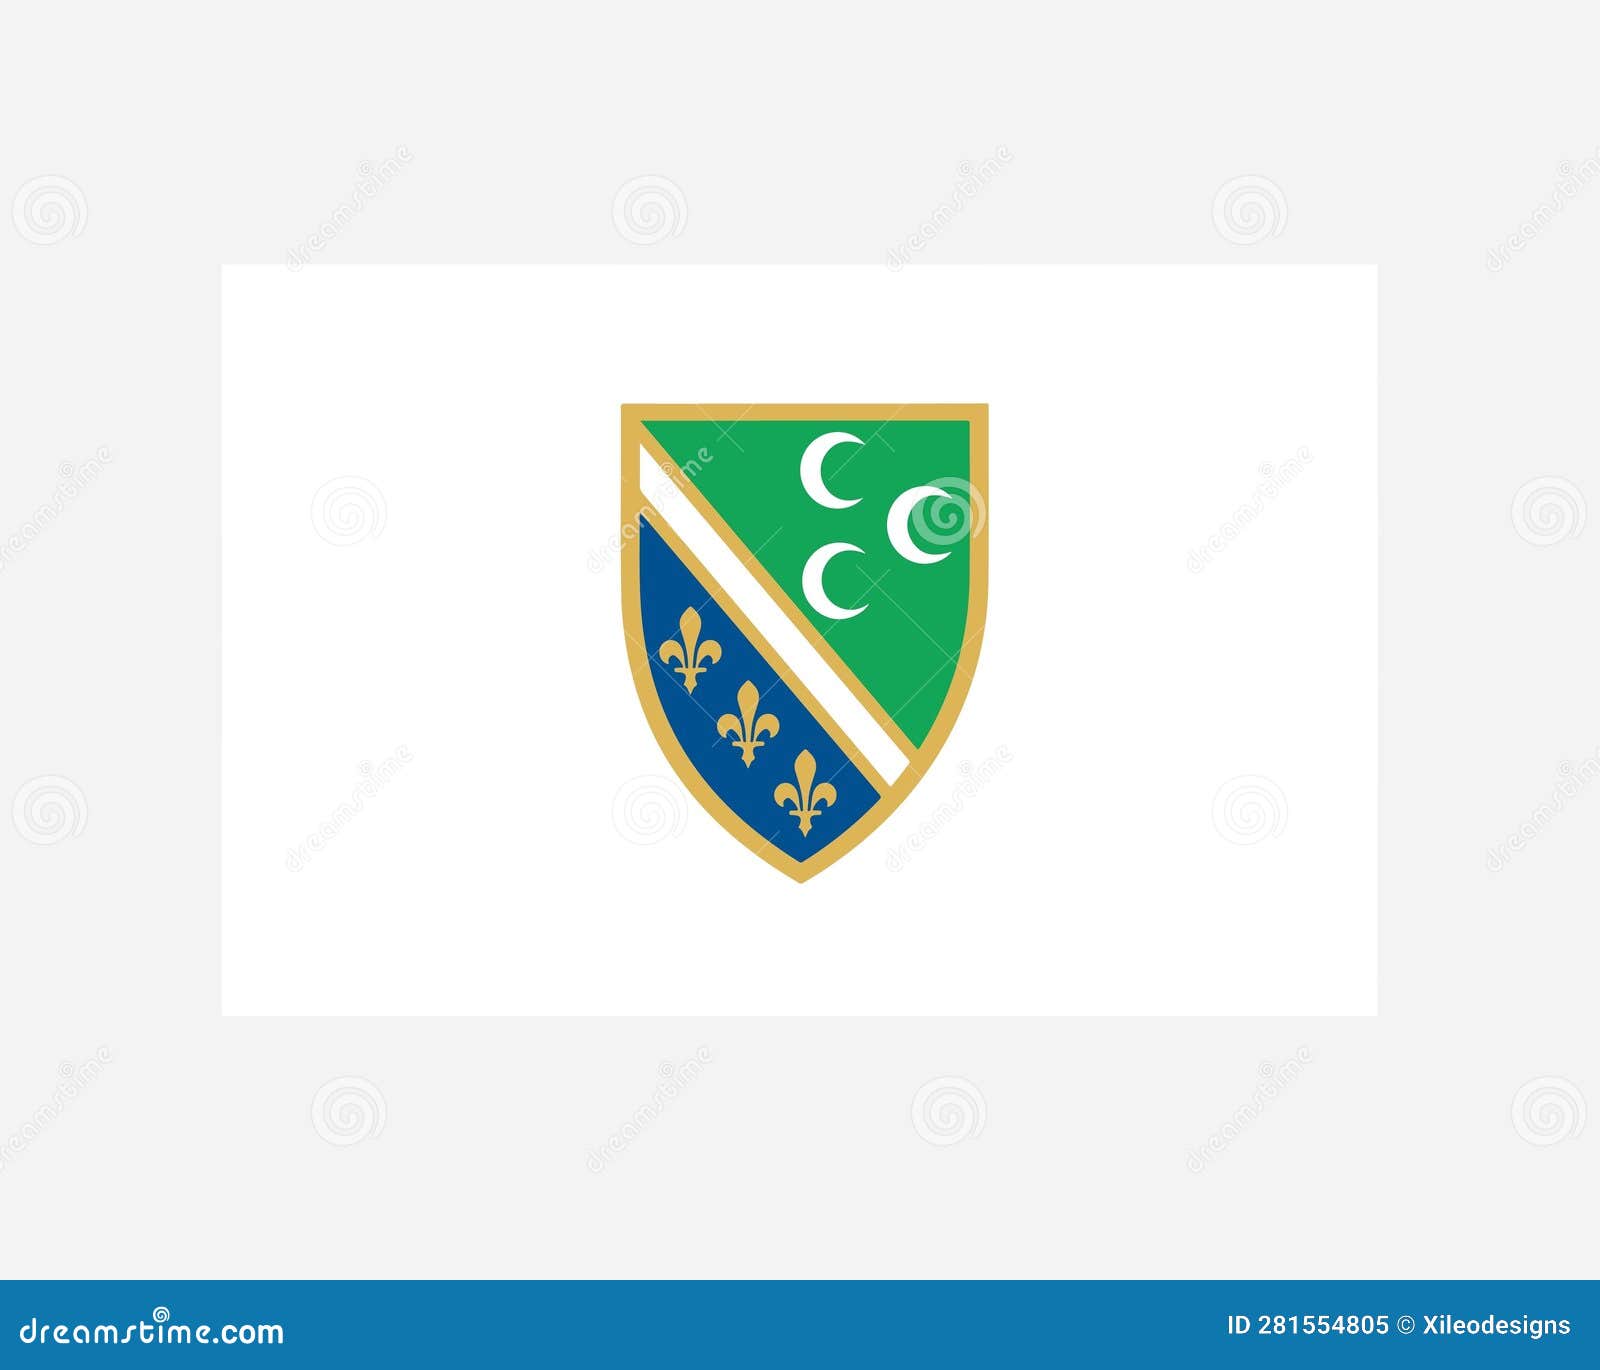 sandzak flag. national coat of arms of bosniac national council. bosniaks of serbia nation country banner icon sign  